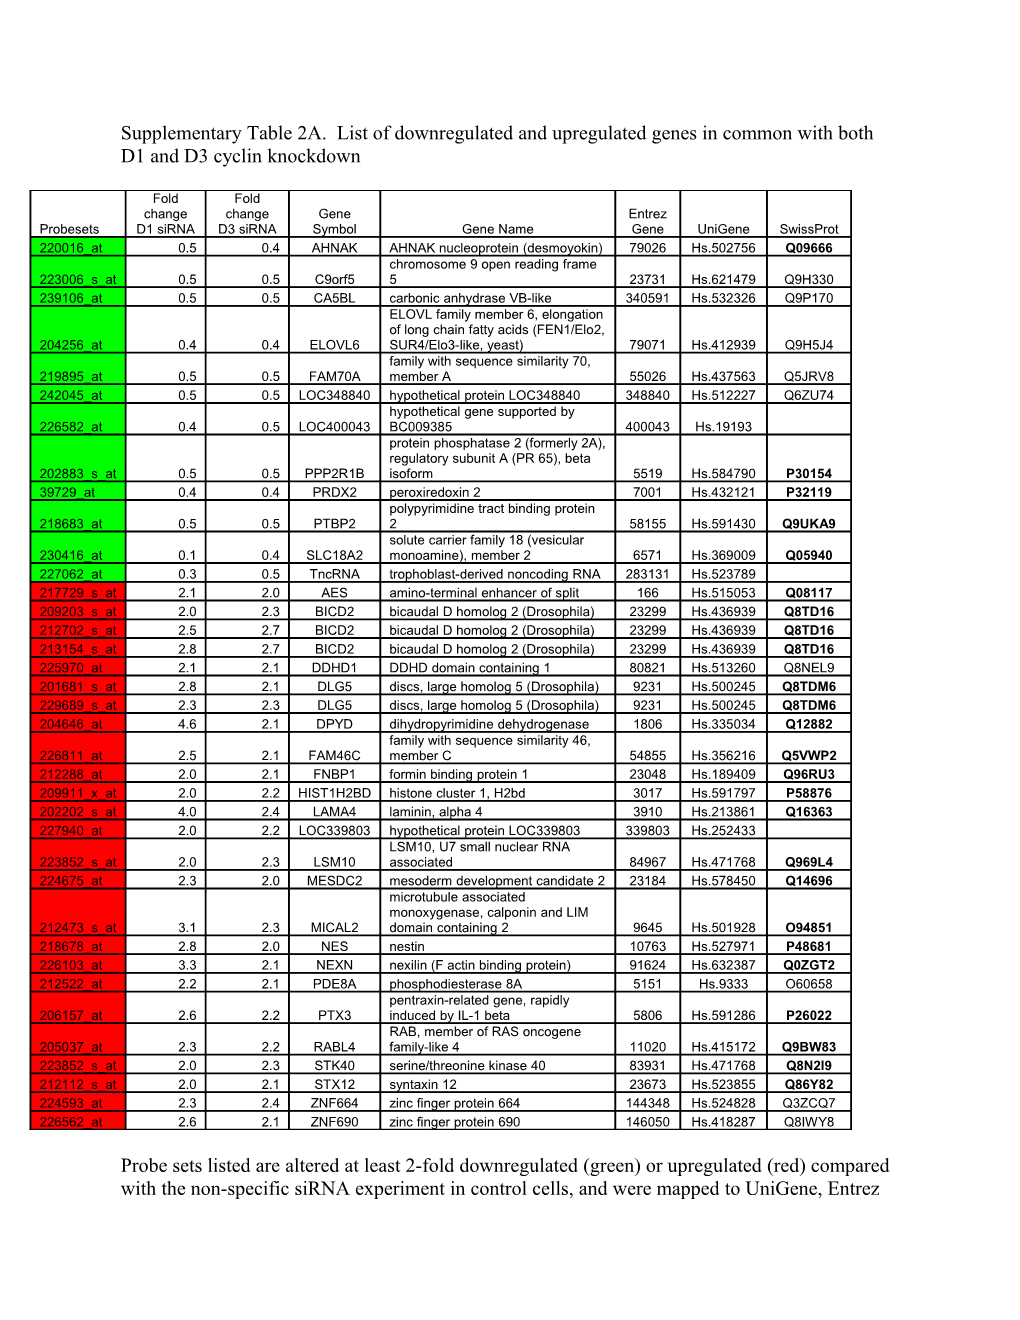 Supplementary Table 2B. List of Downregulated and Upregulated Genes Unique to Cyclin D1